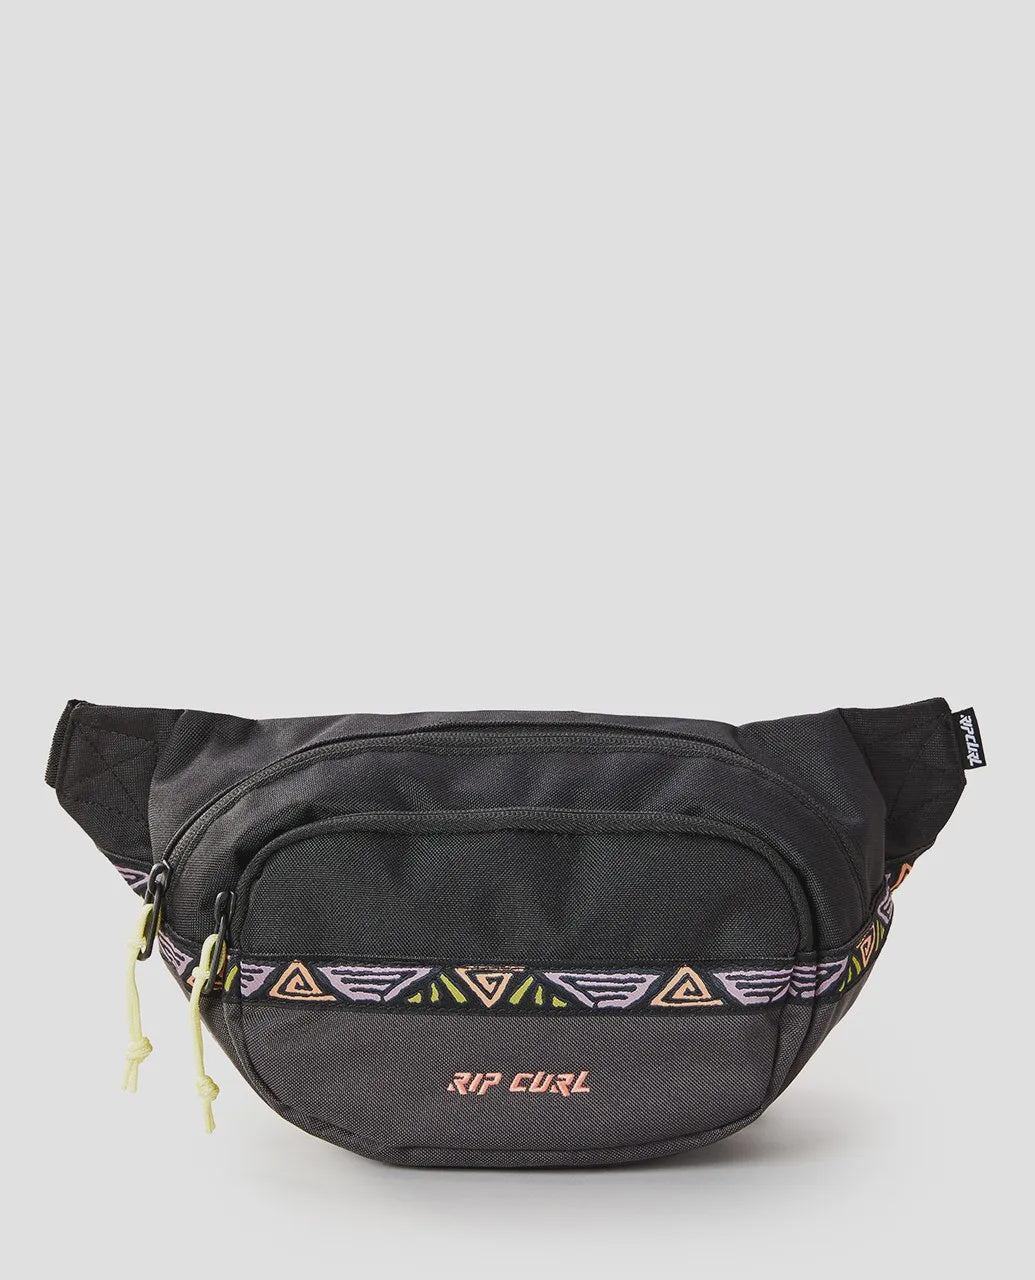 Archives Small Waist Bag